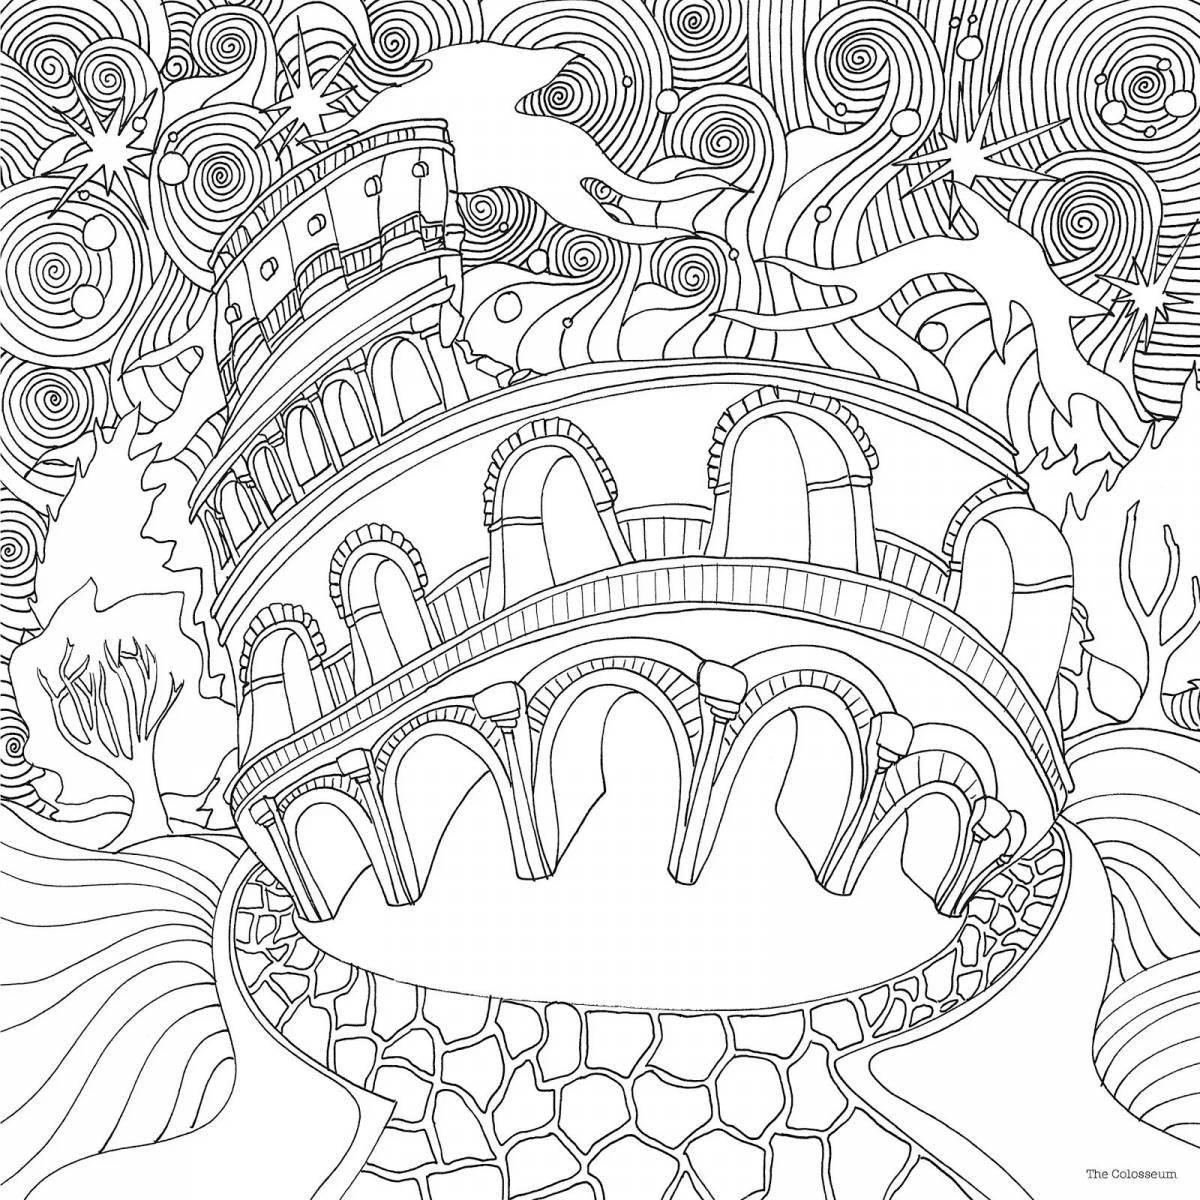 Amazing coloring pages magic patterns